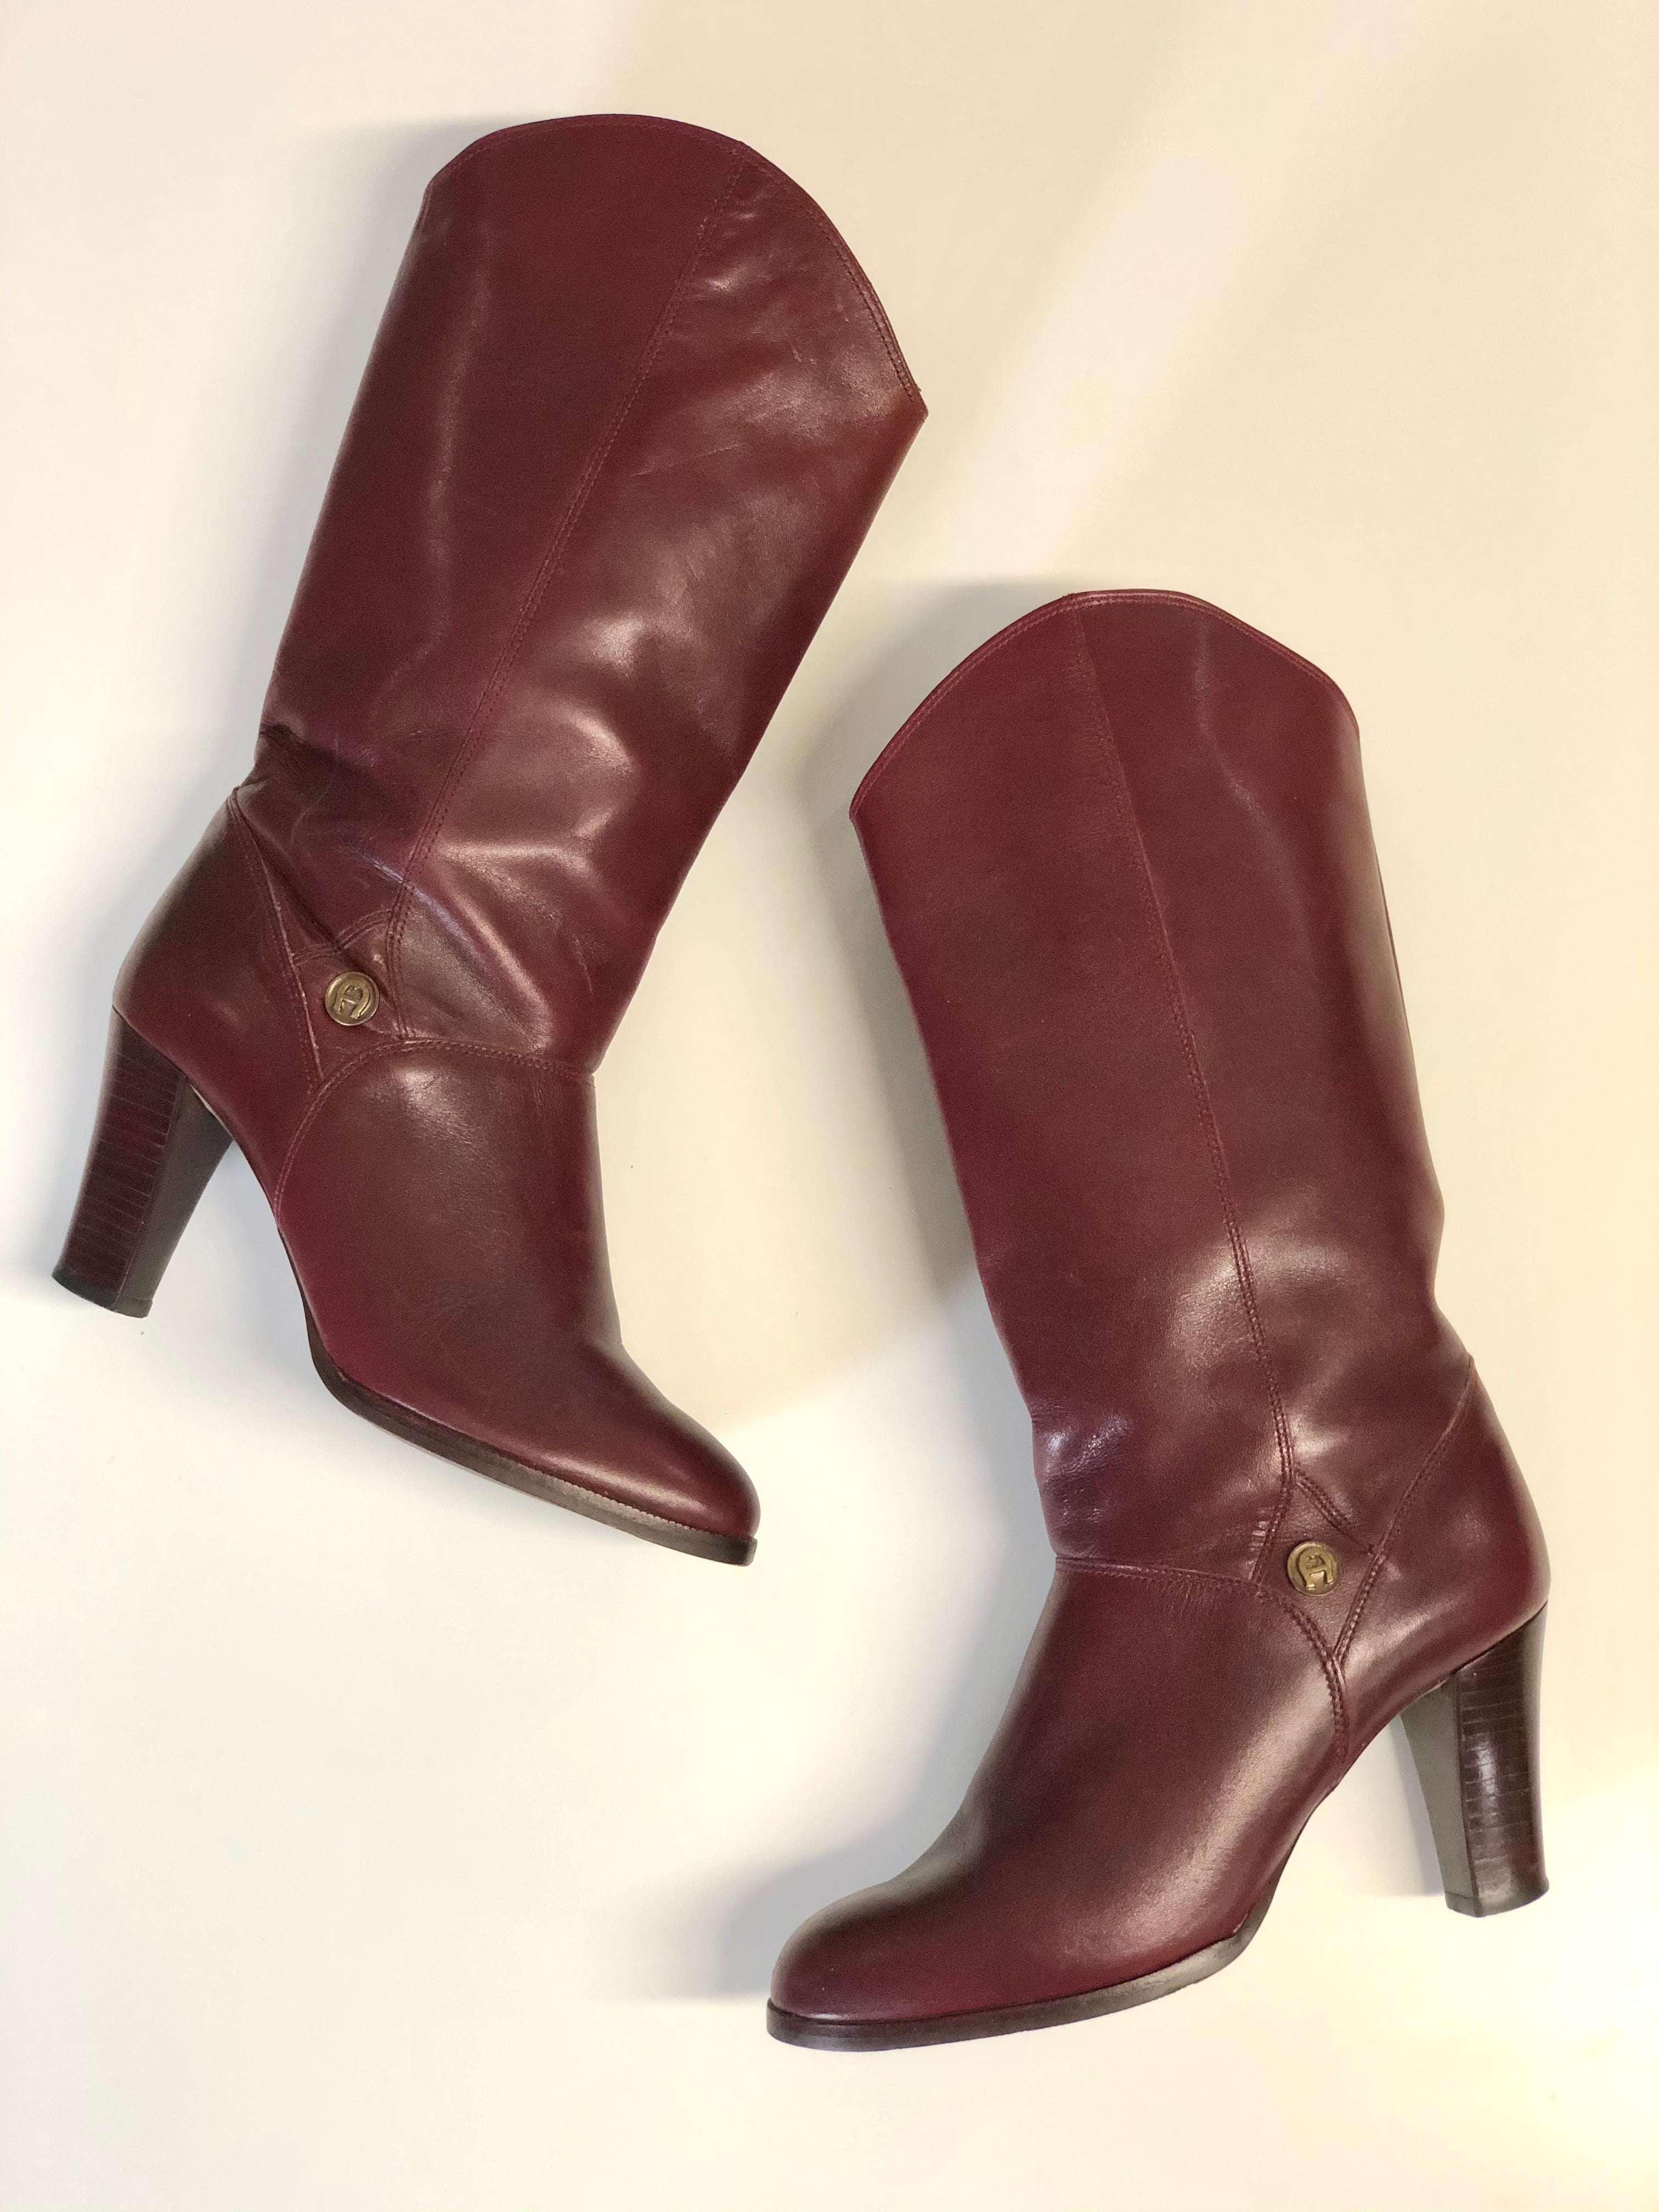 Gucci Riding Boots - Vintage Gucci Boots - 70s Leather Boots